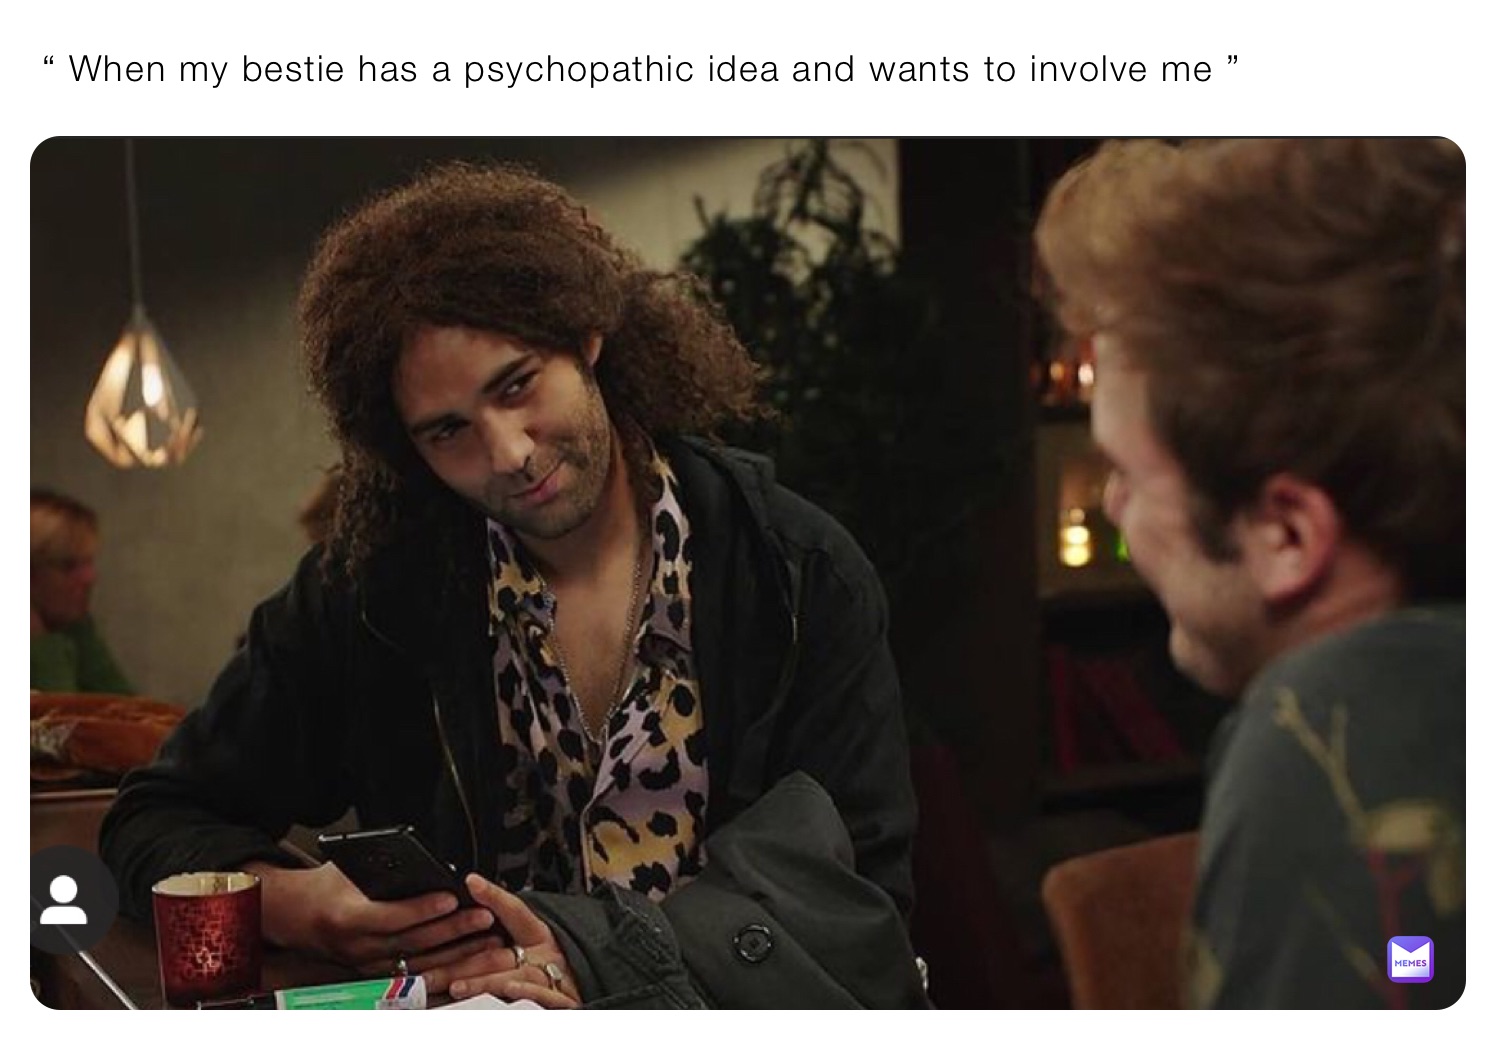  “ When my bestie has a psychopathic idea and wants to involve me ”